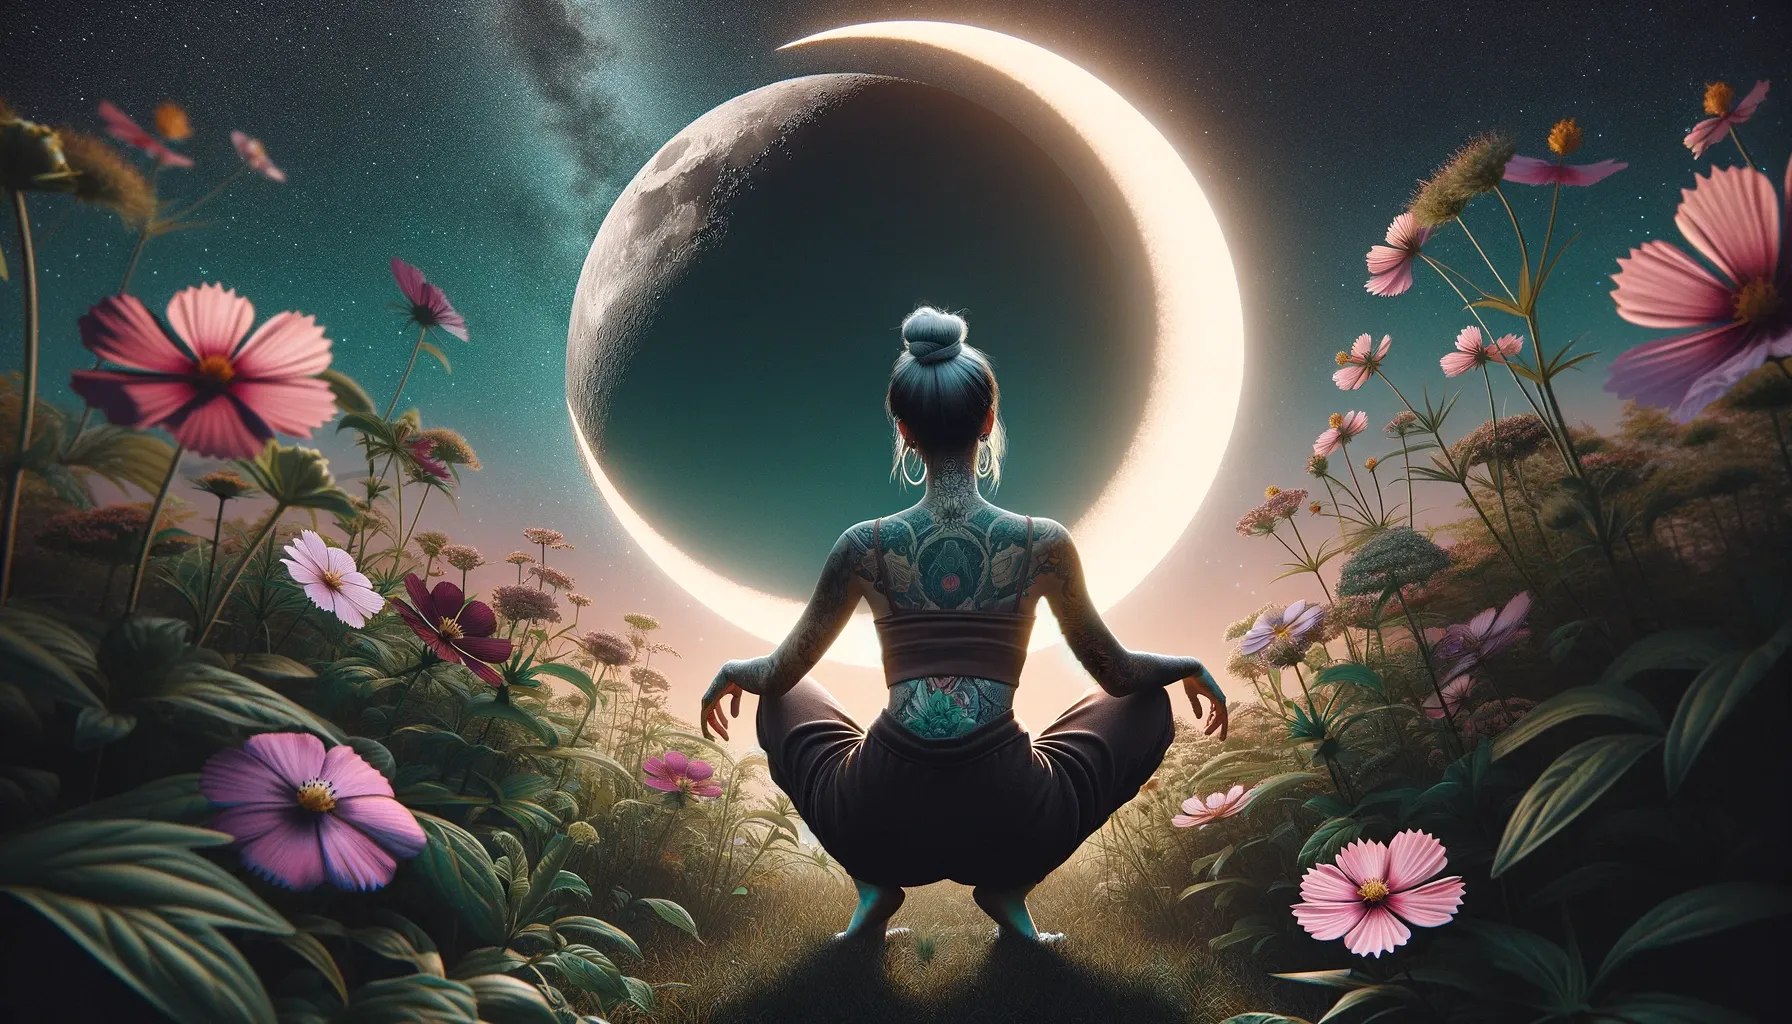 A woman is squatting down in a field of pink and green flowers to admire the Waxing Crescent Moon.